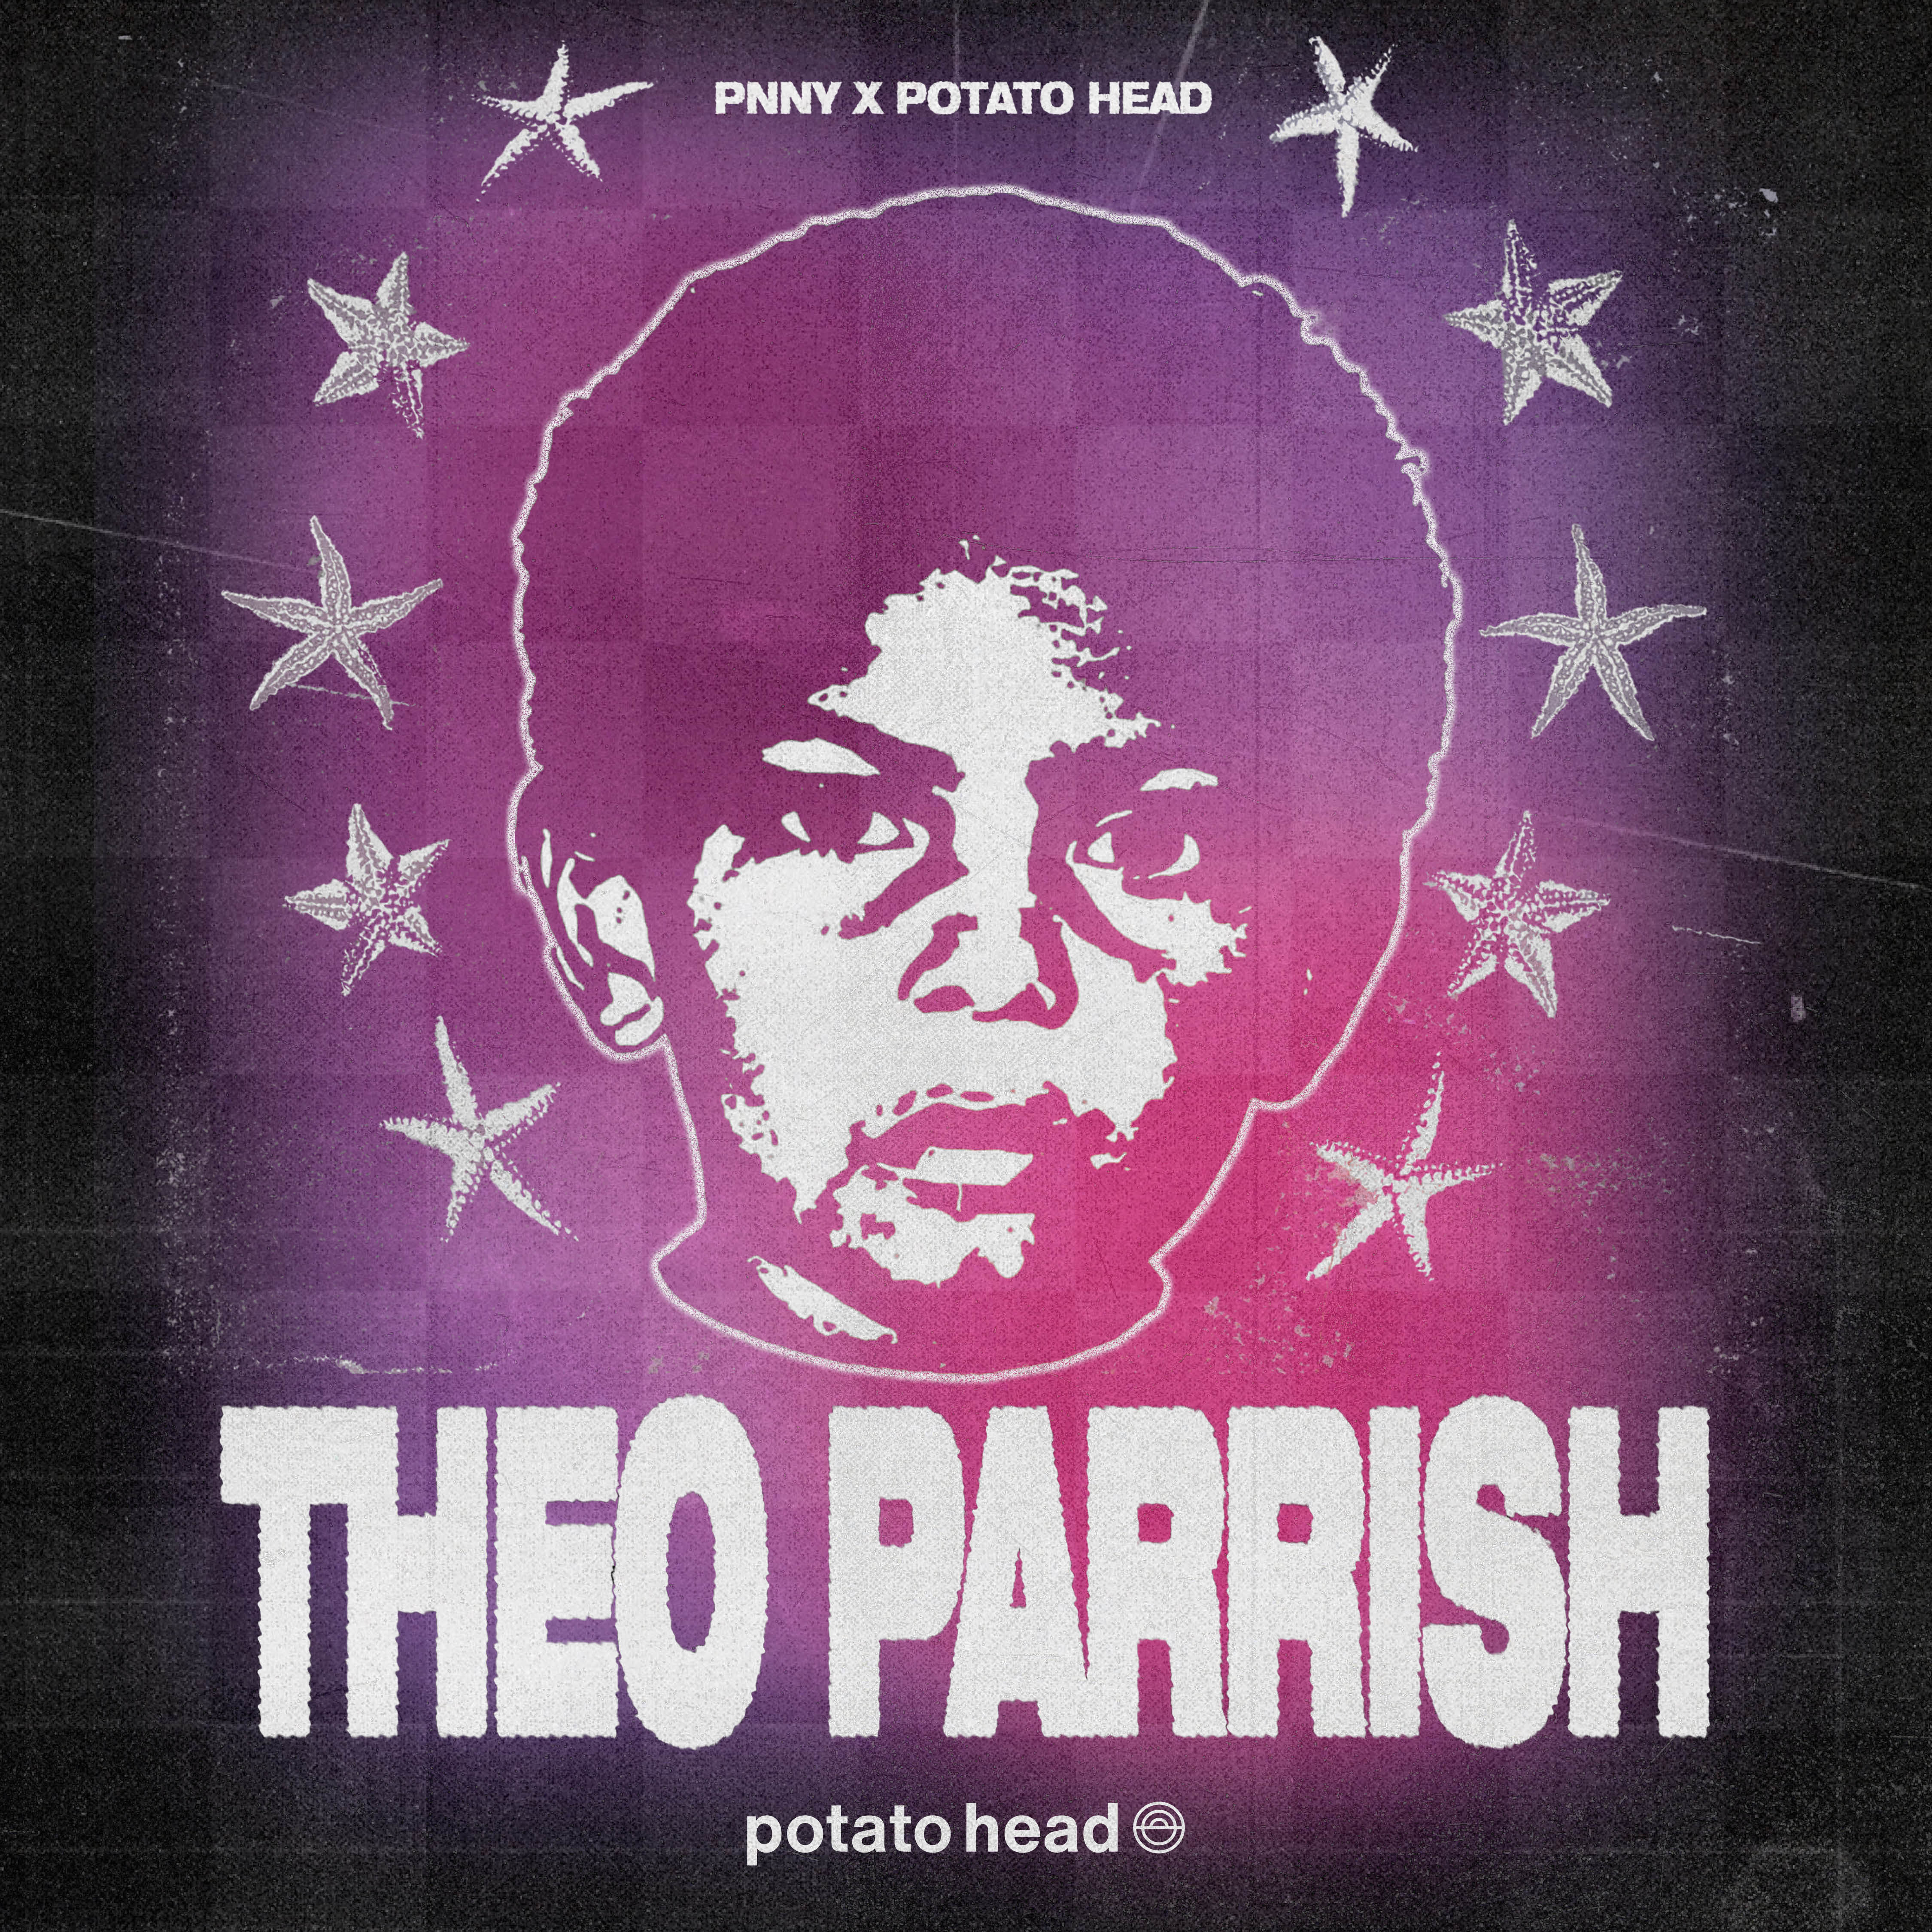 Theo Parrish · Past Events